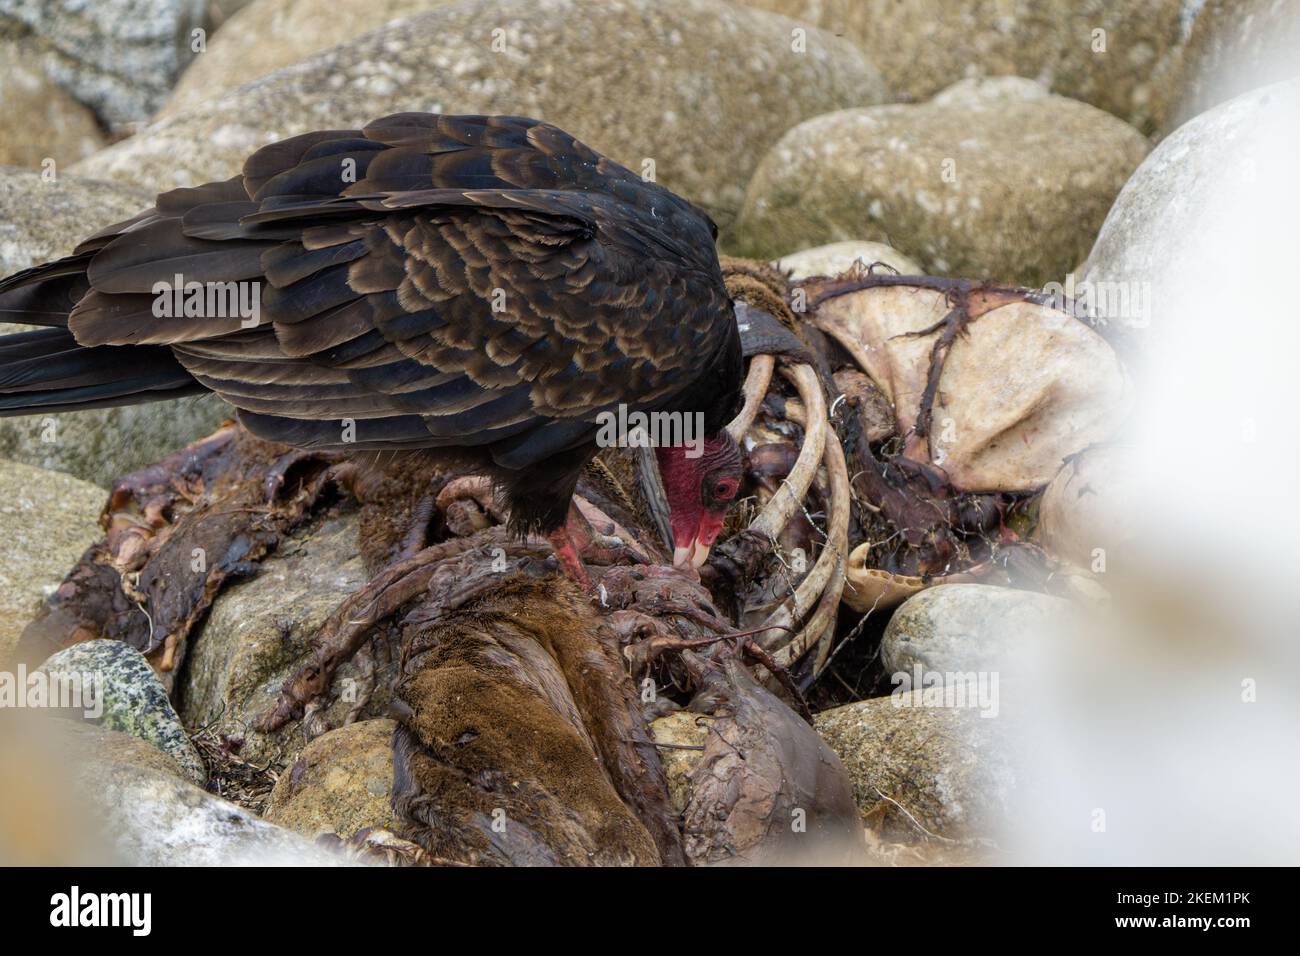 Turkey Vultures eating a dead sea lion at 17 Mile drive, California Stock Photo